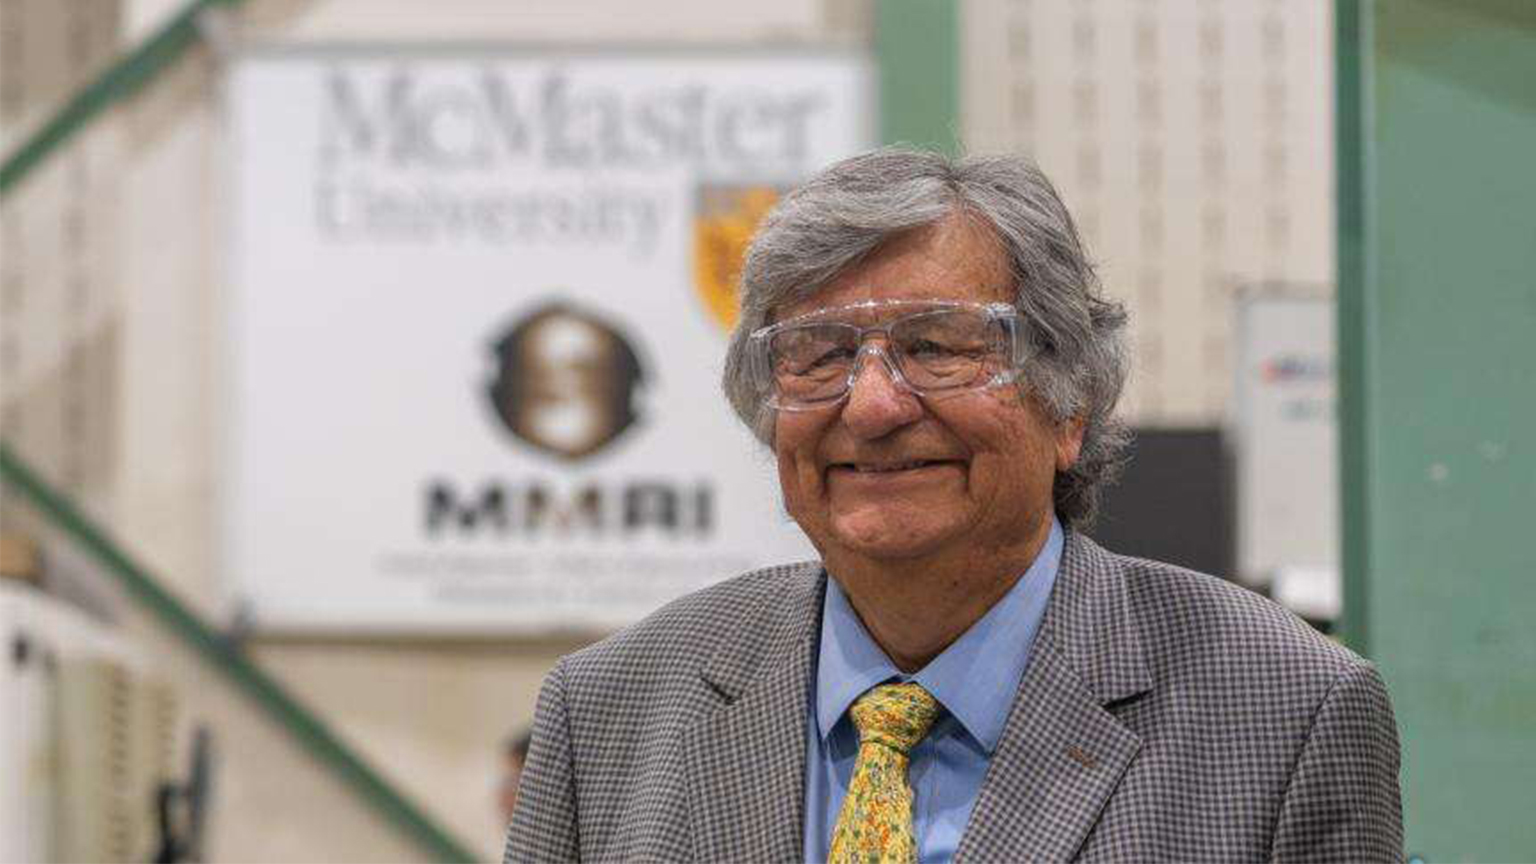 Barry Hill smiles while wearing safety glasses in front of a McMaster MMRI banner.